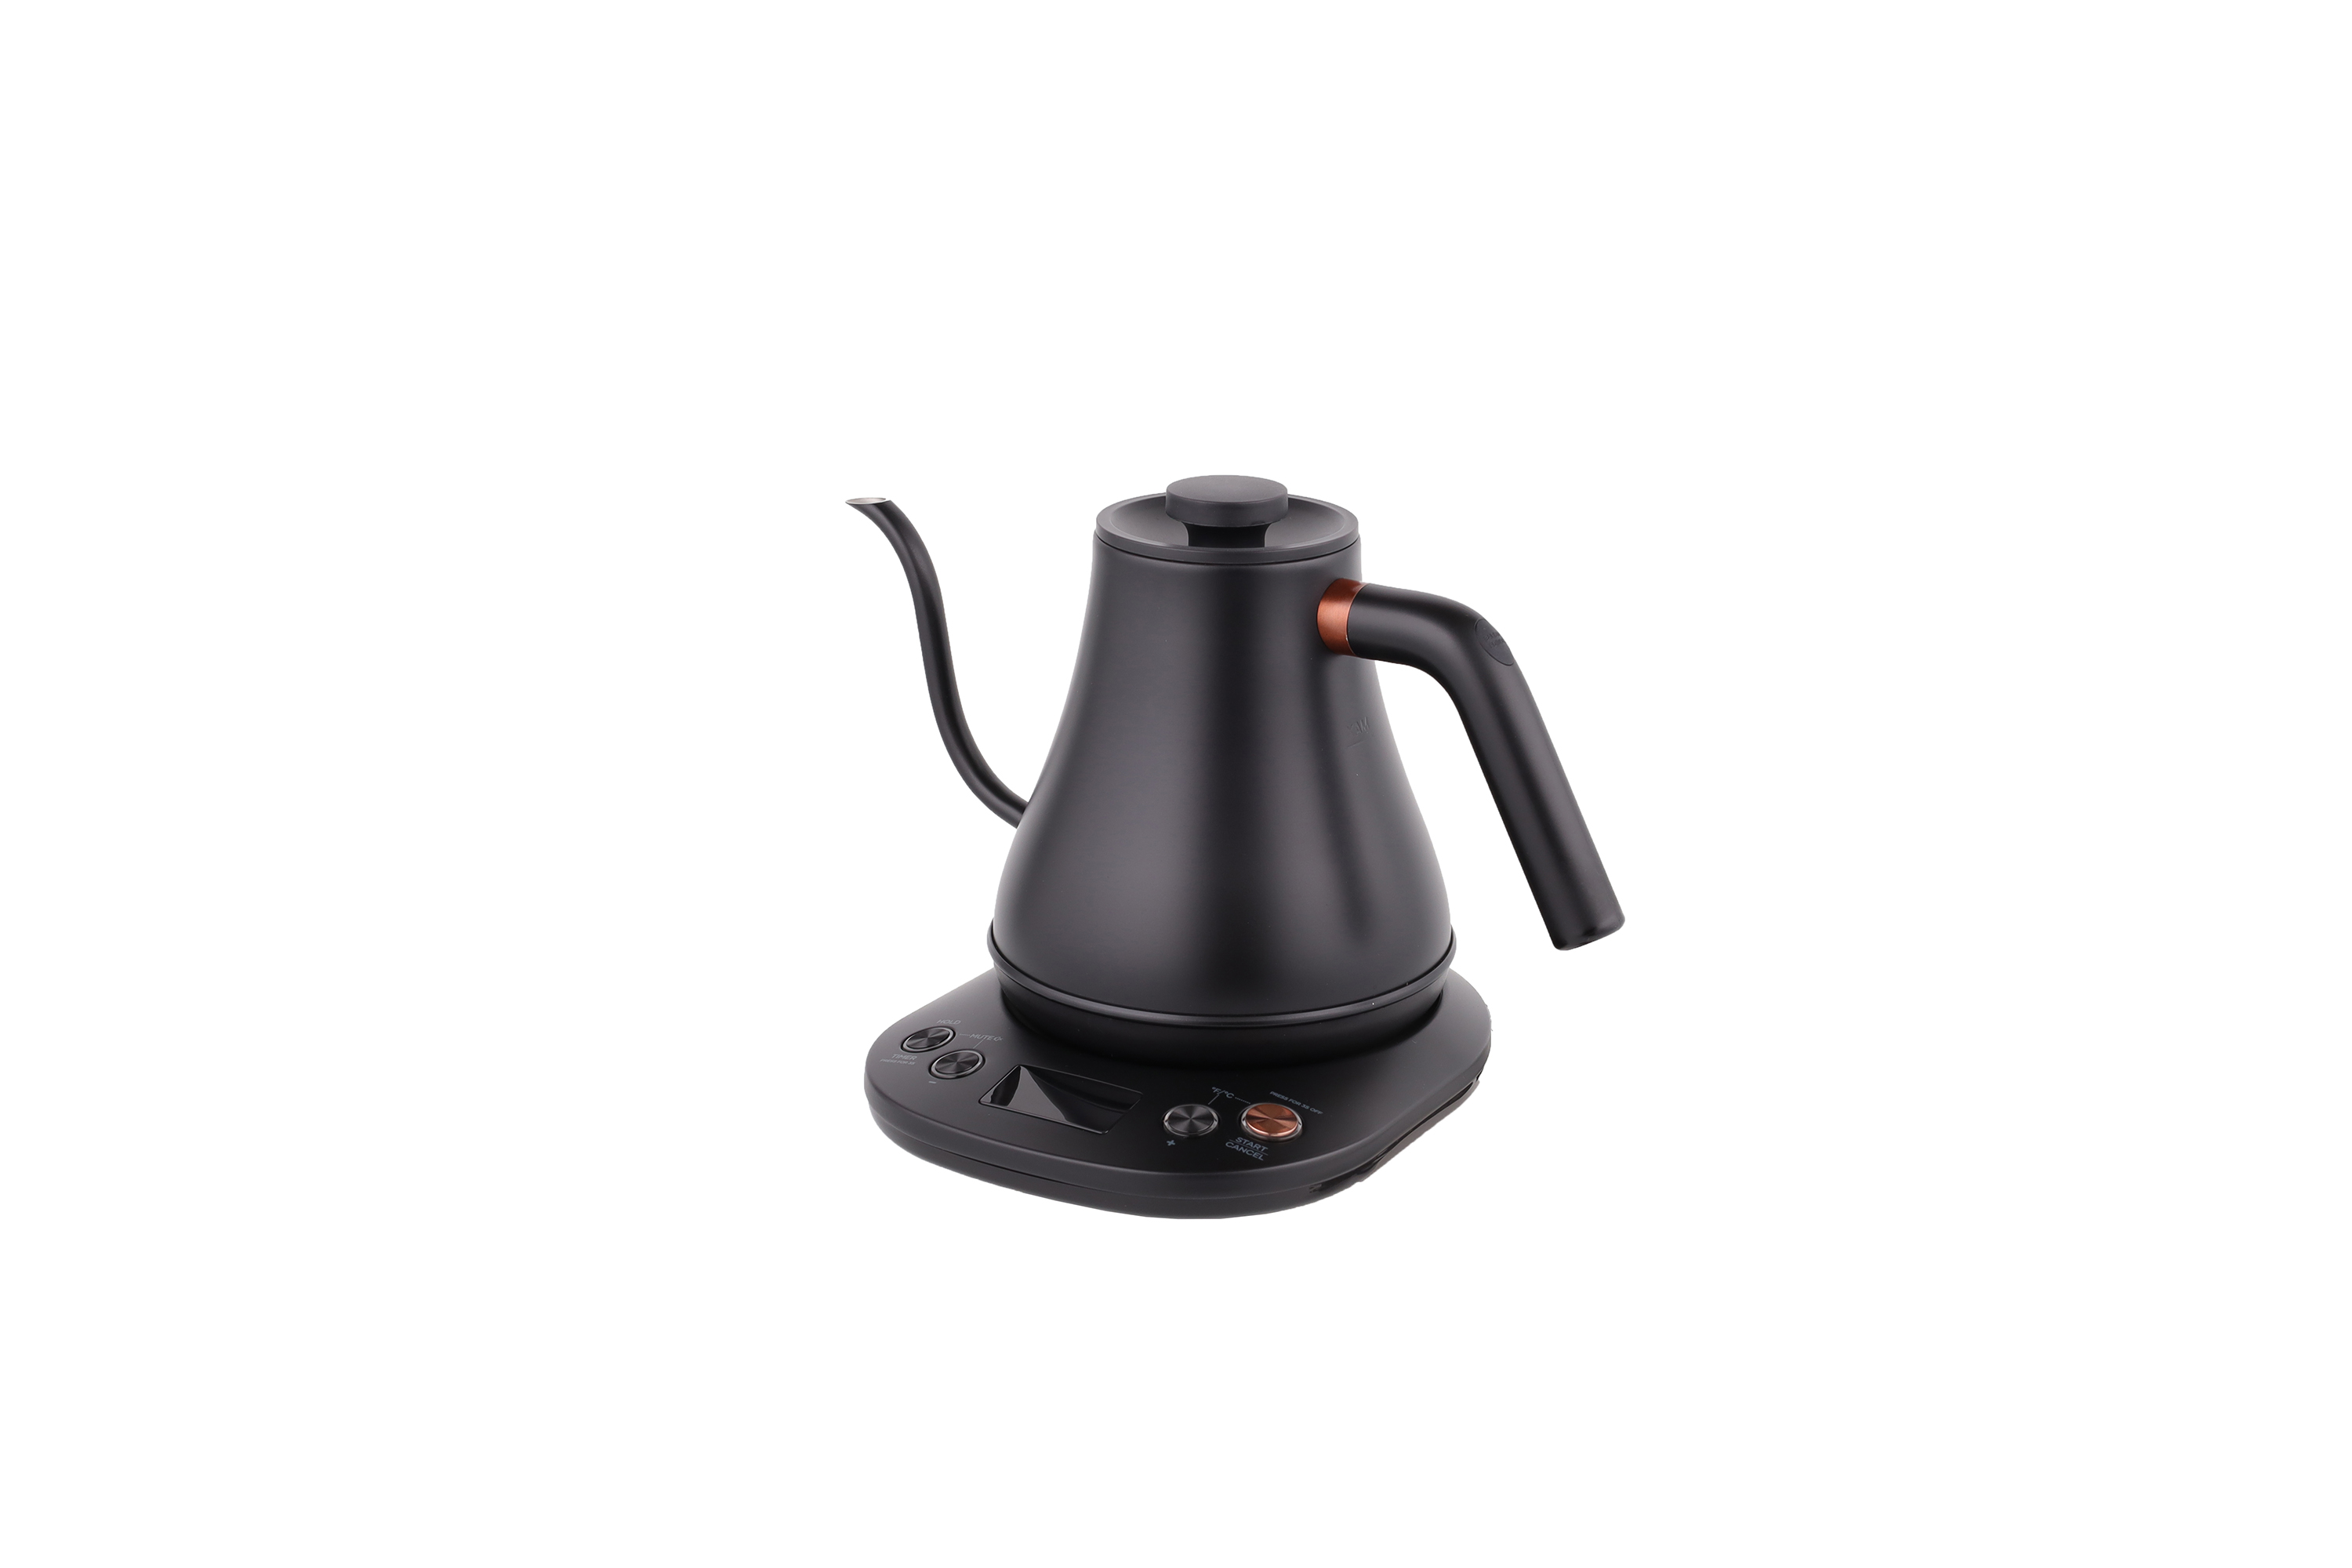 REVIEWS & FEATURES Mecity Electric Gooseneck Kettle With Display